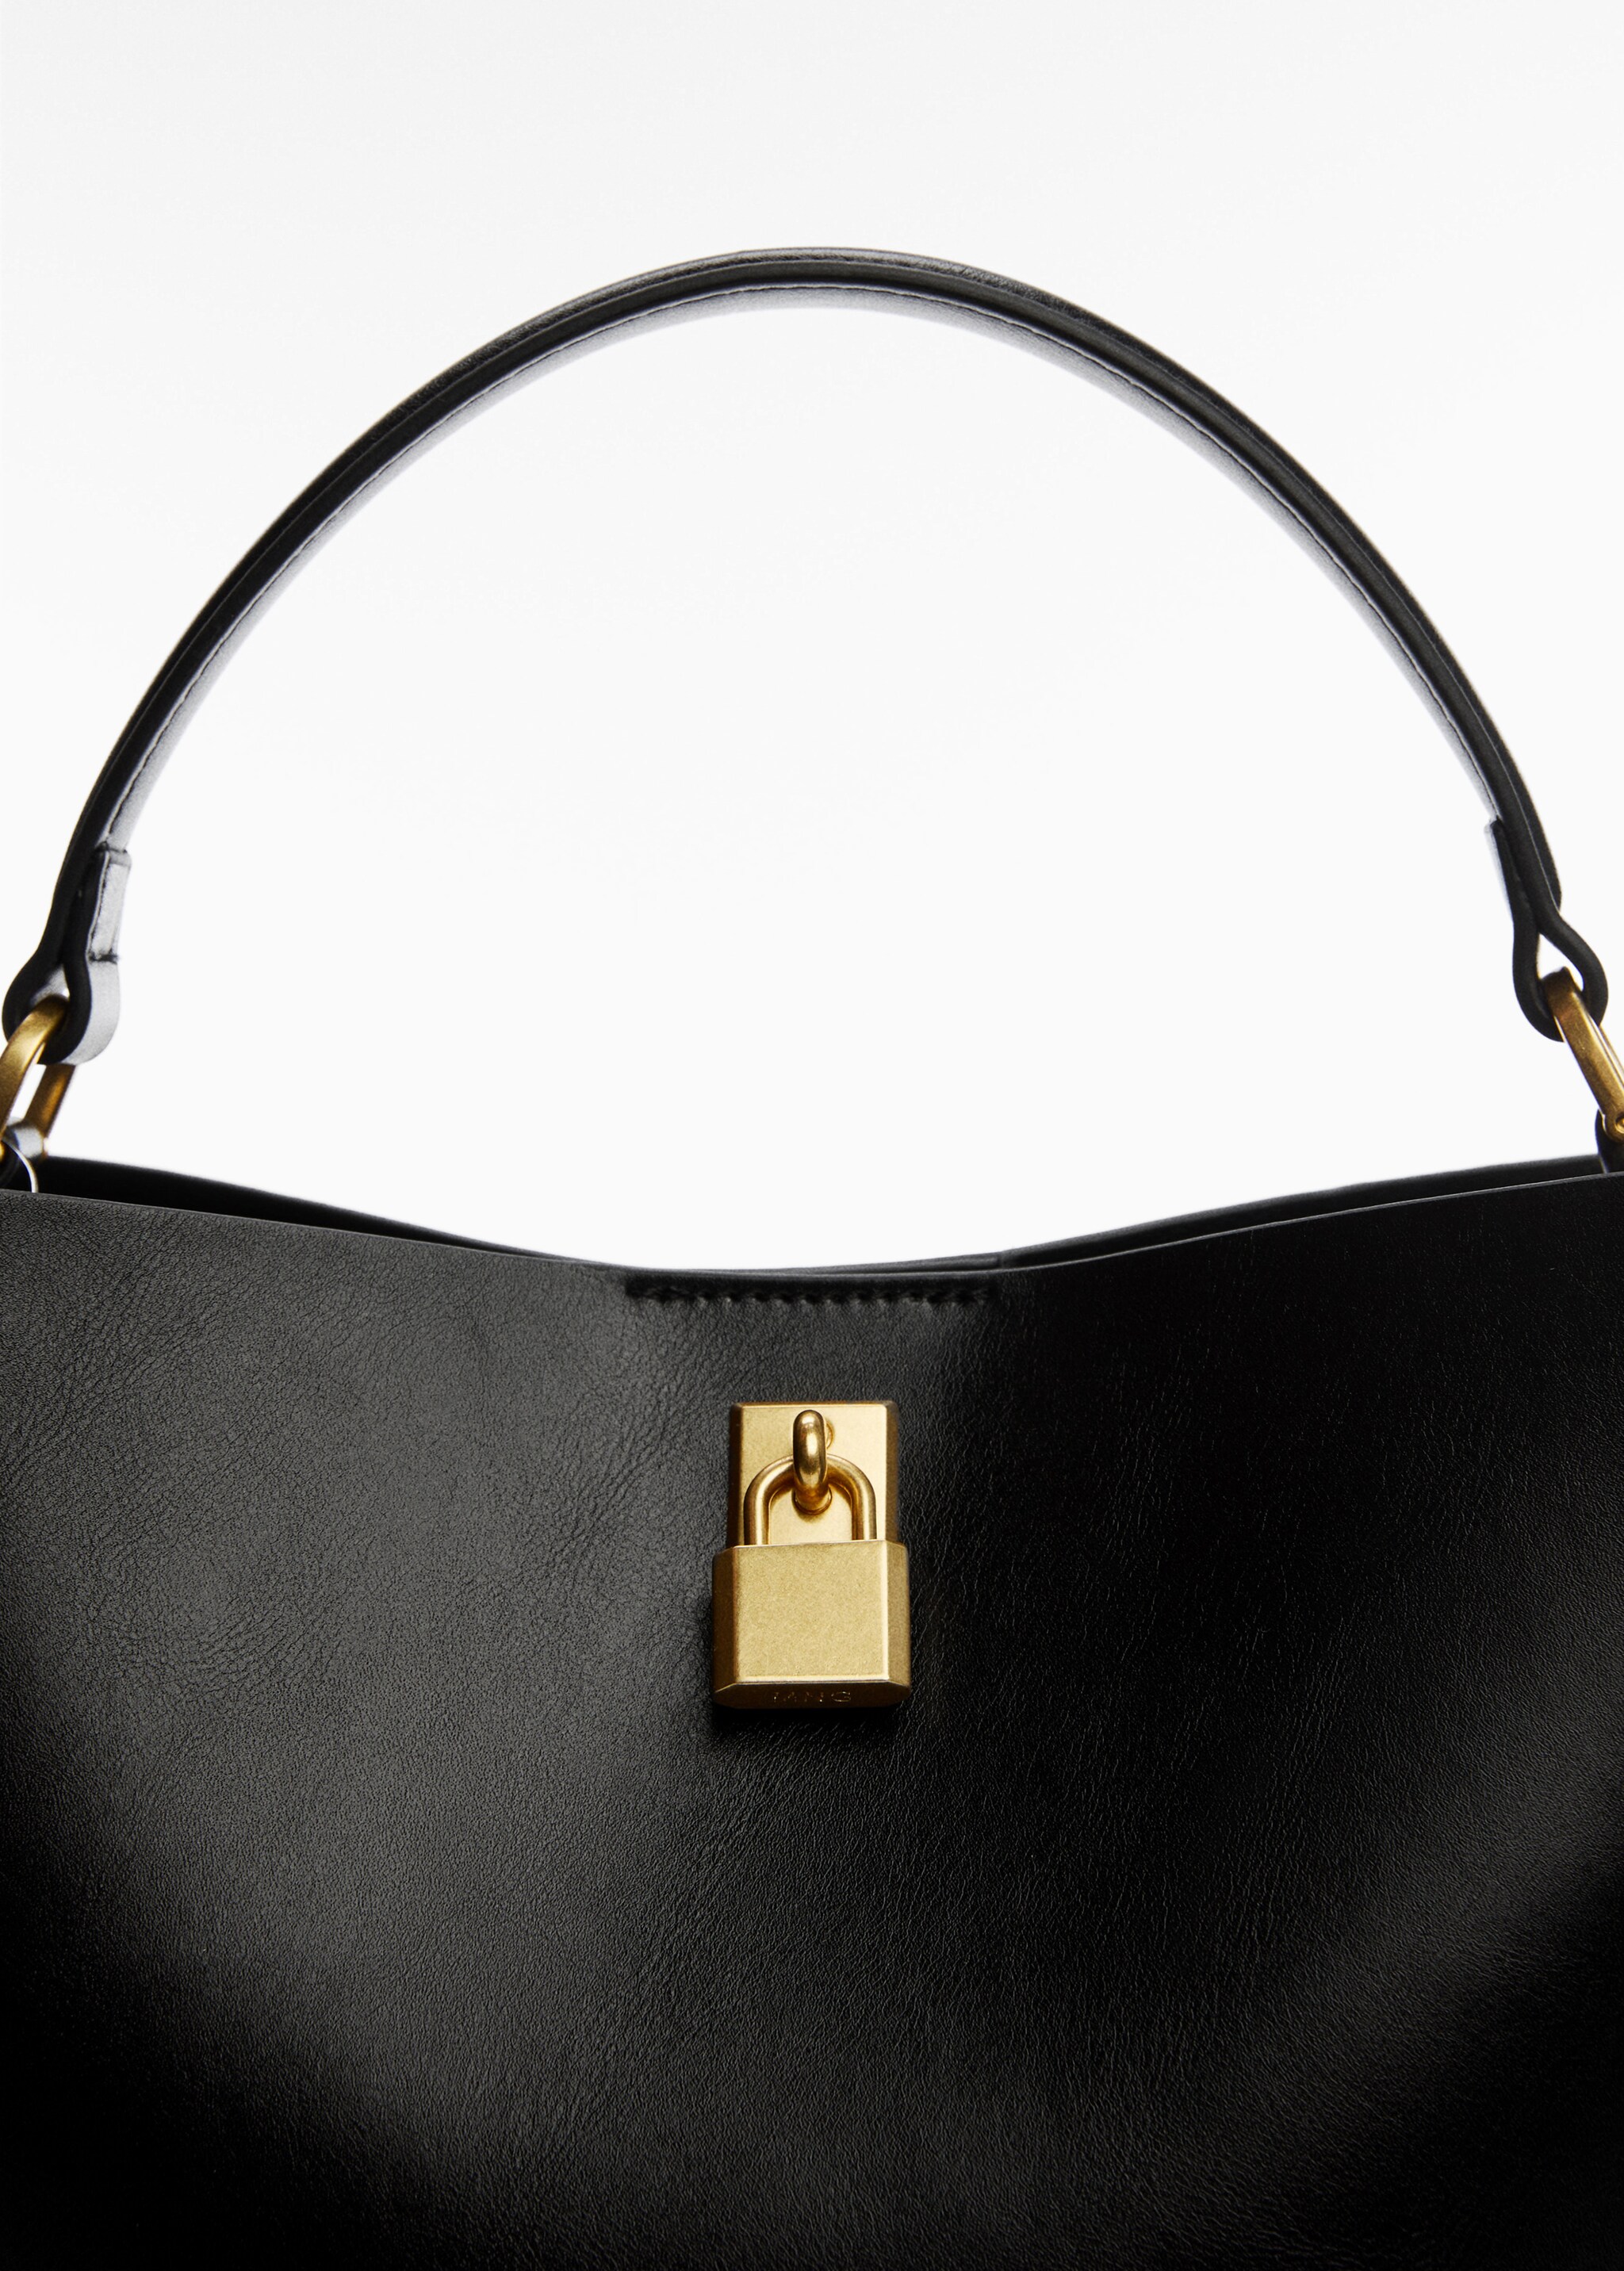 Shopper bag with padlock - Details of the article 1